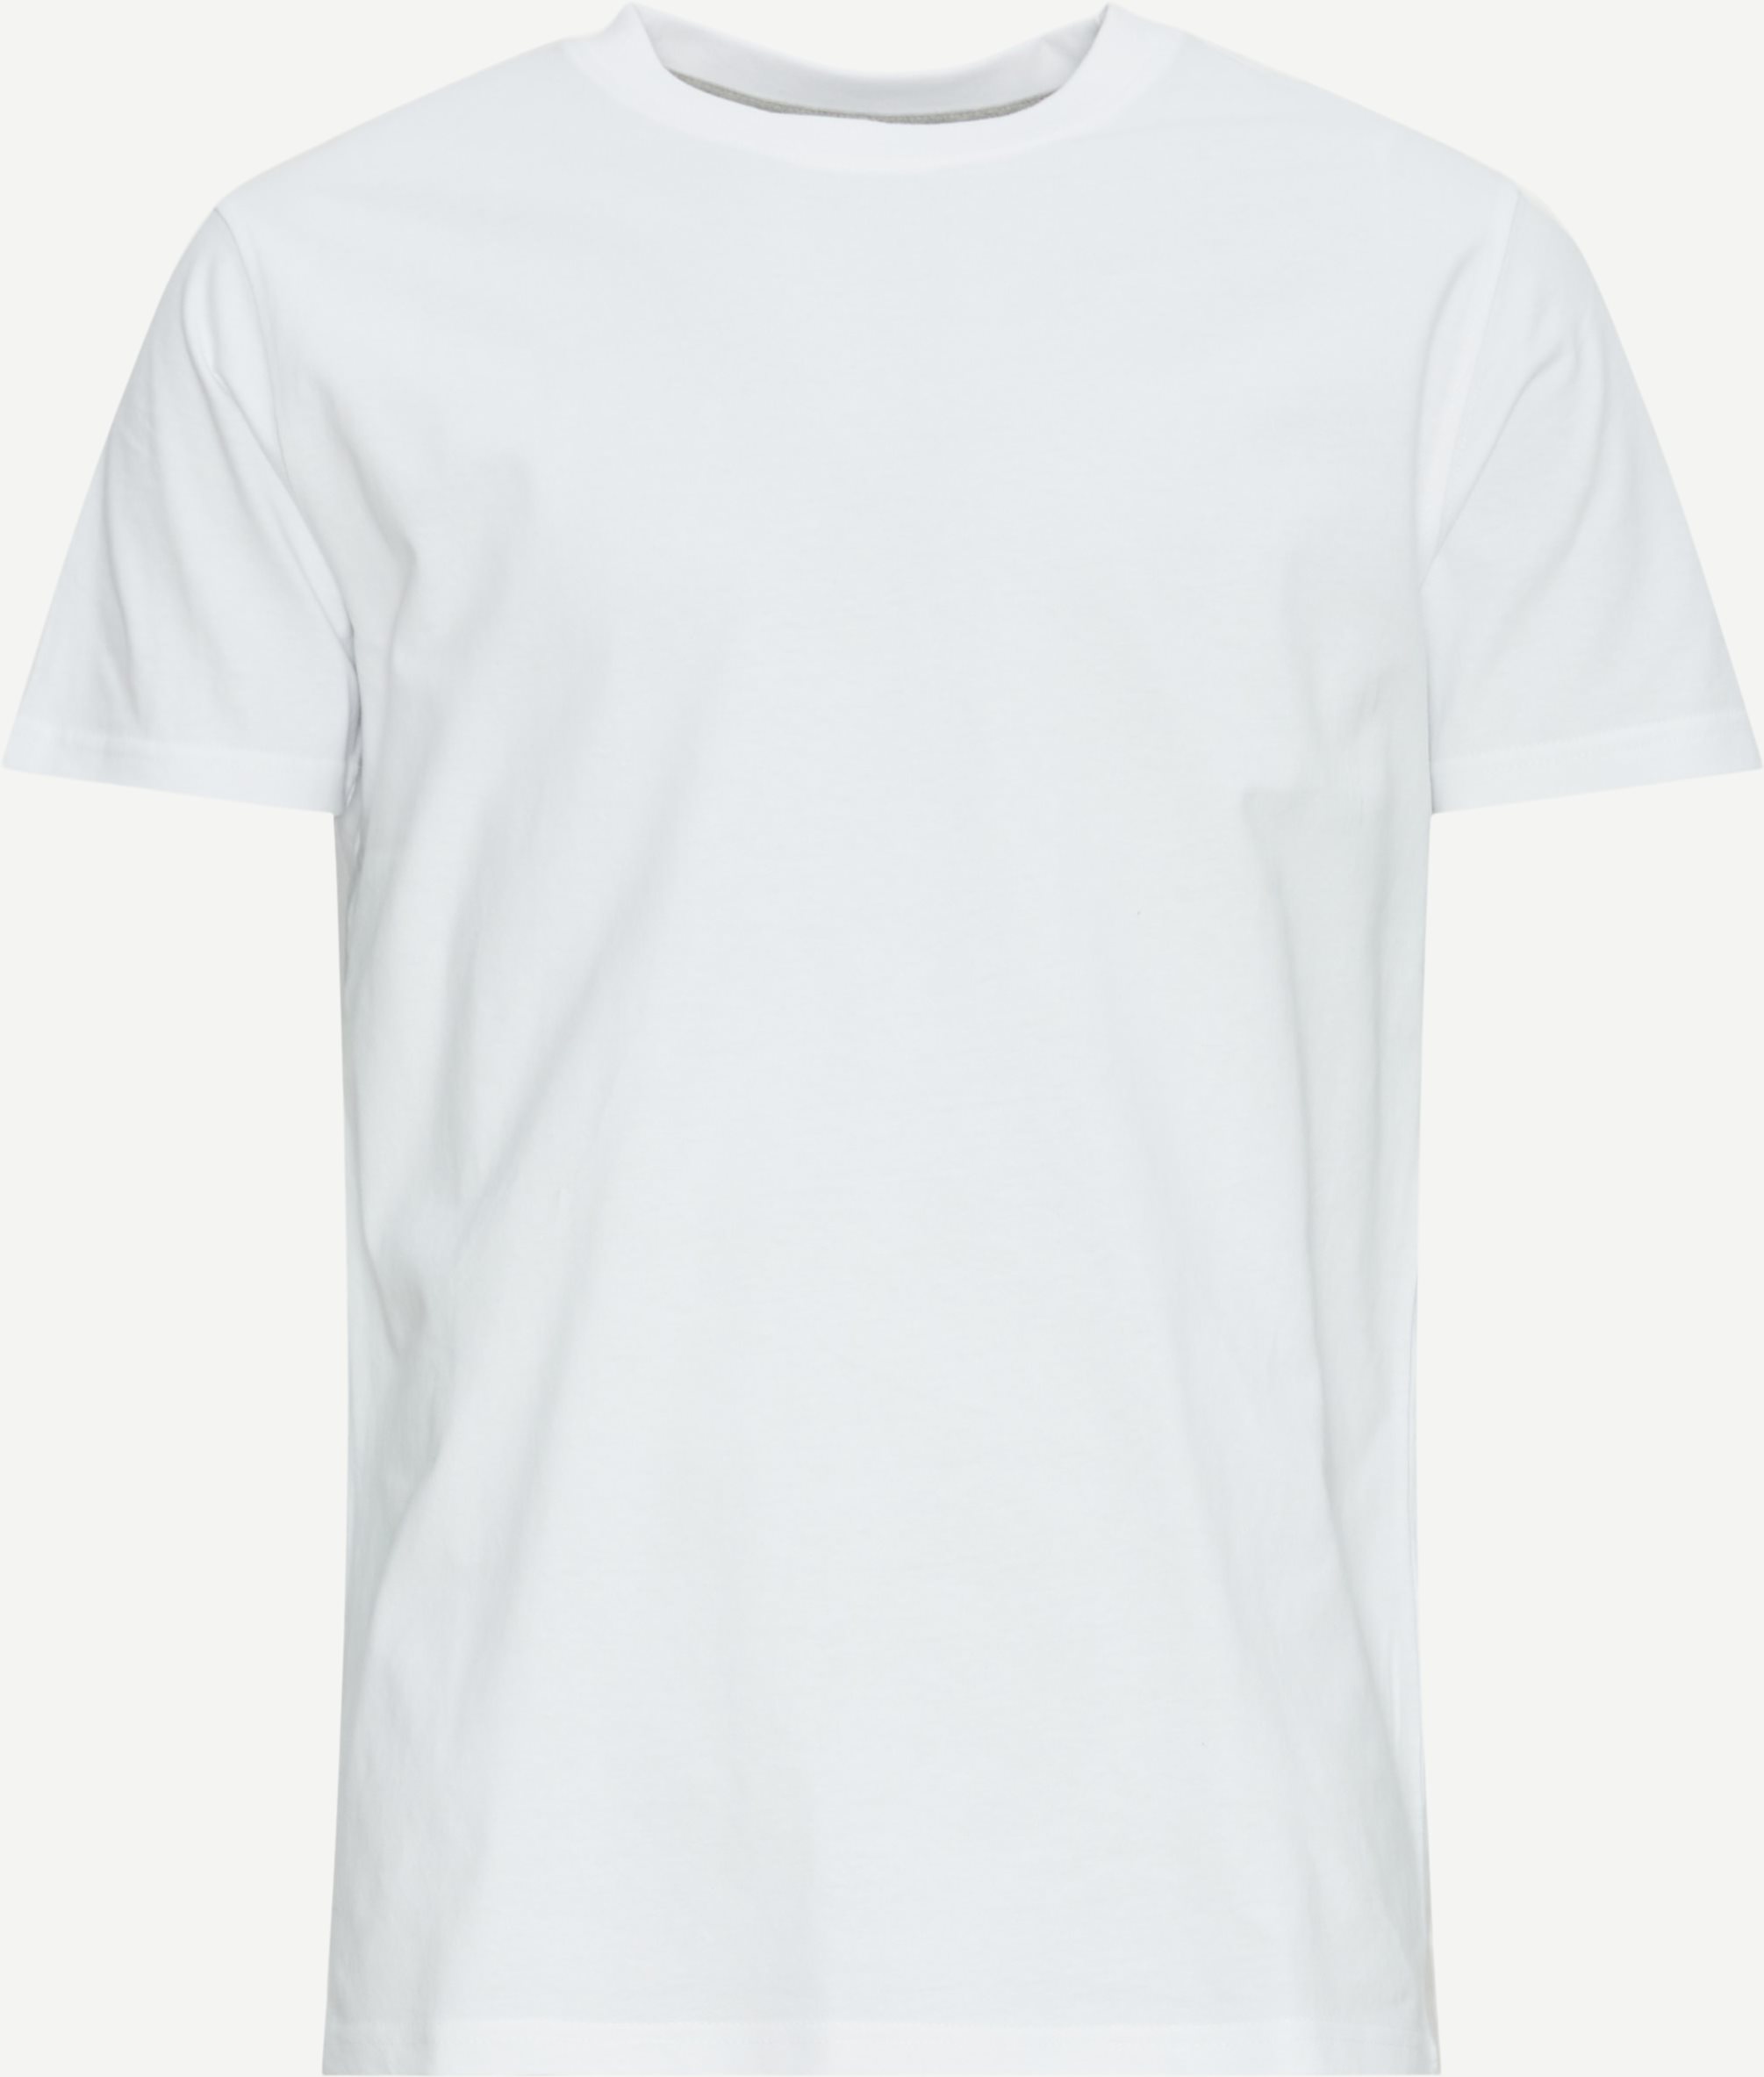 K BY KAUFMANN T-shirts GREASE White